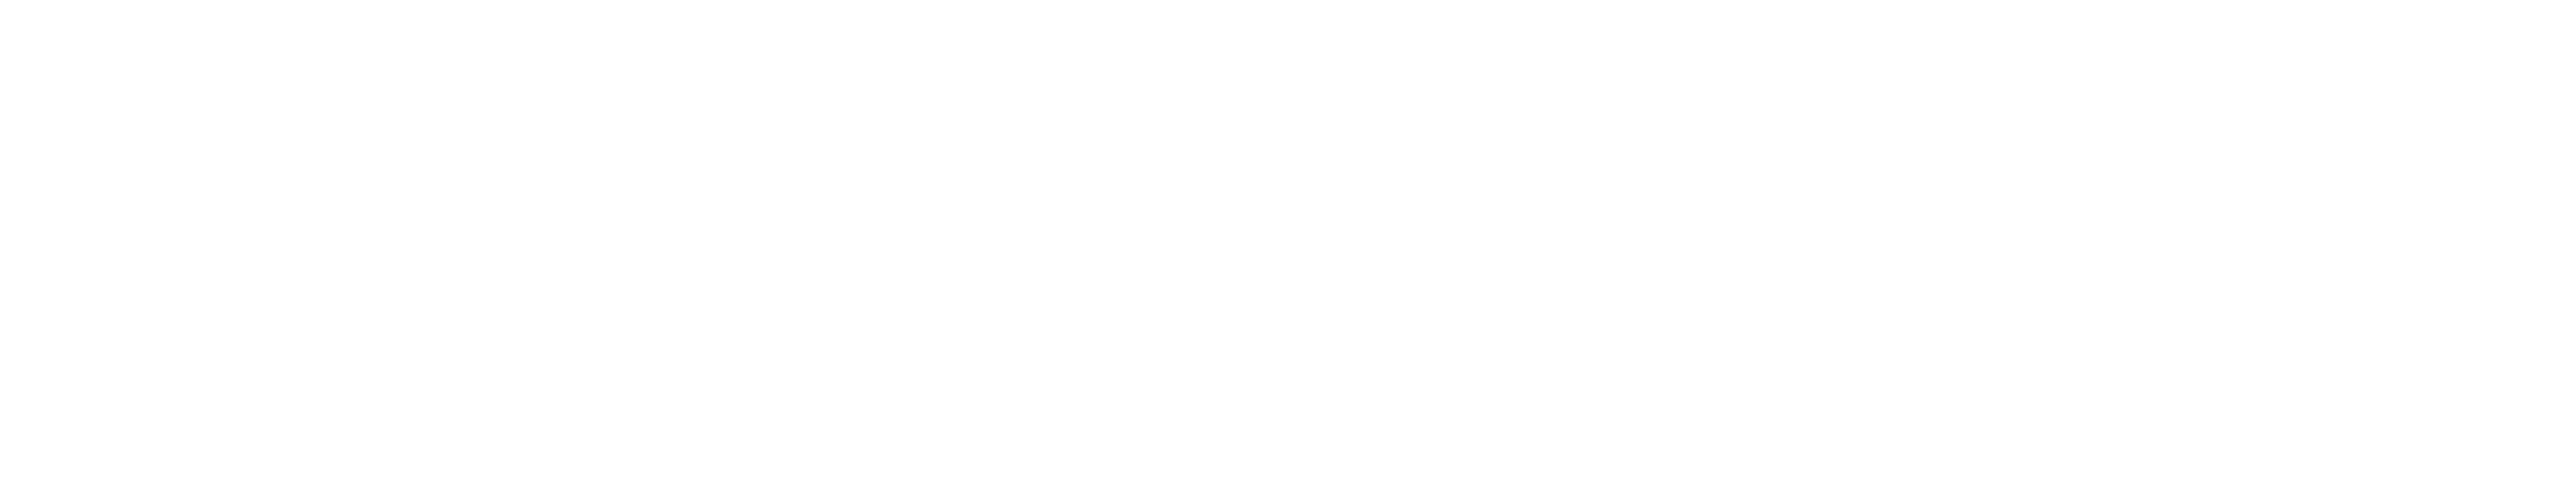 Problem Oriented Policing Crimesolutions